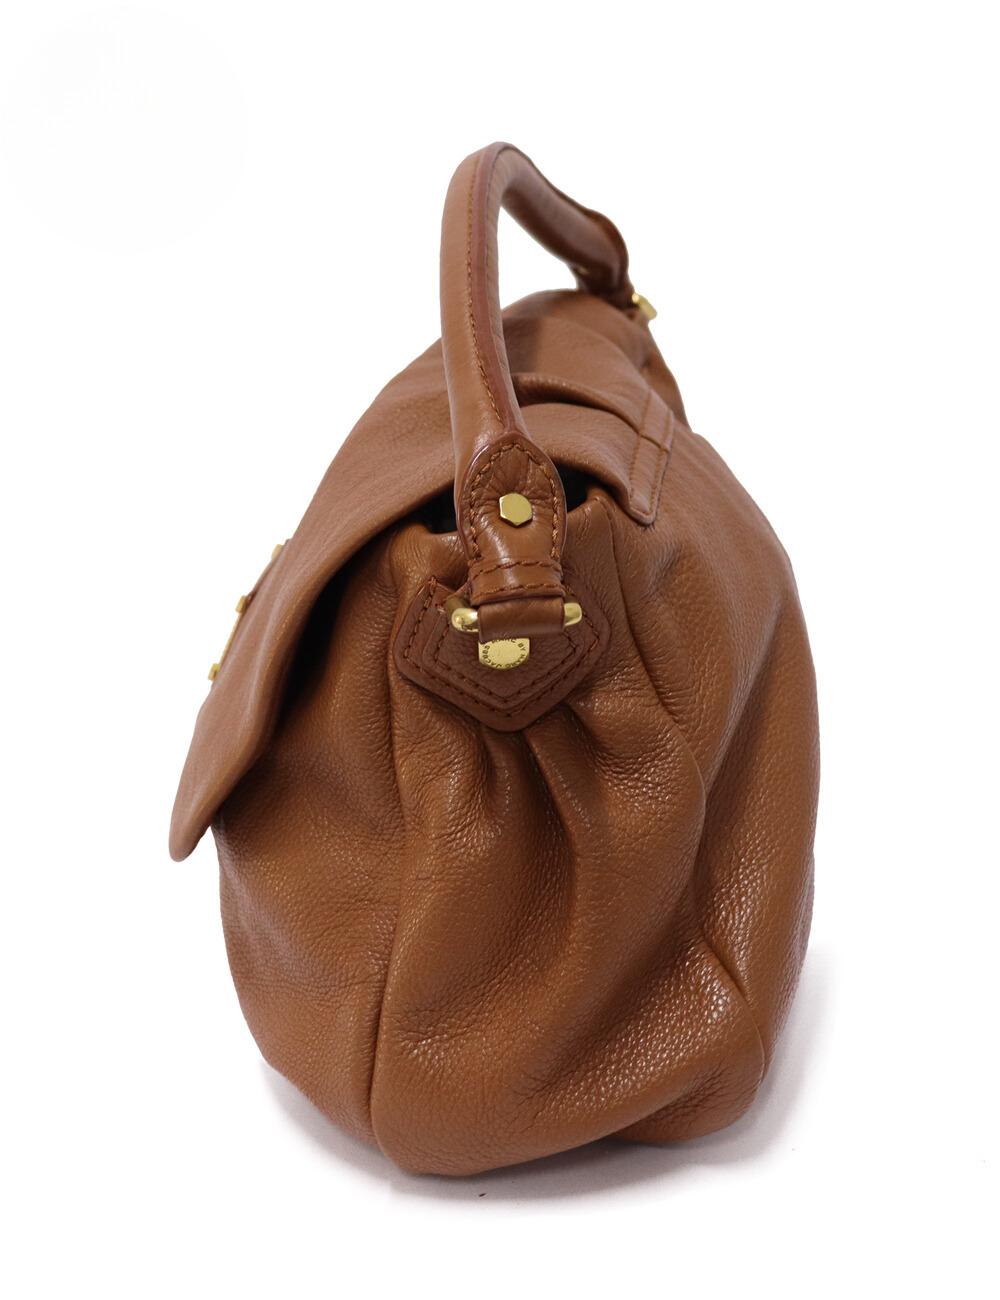 Marc by Marc Jacobs Women's Brown Re-edition Lil Ukita Classic Q Bag, features an adjustable shoulder strap and an interior slip wall pockets.

Material: Leather.
Hardware: Gold.
Height: 20cm
Width: 33cm
Depth: 9cm
Handle Drop: 10cm
Shoulder Strap: